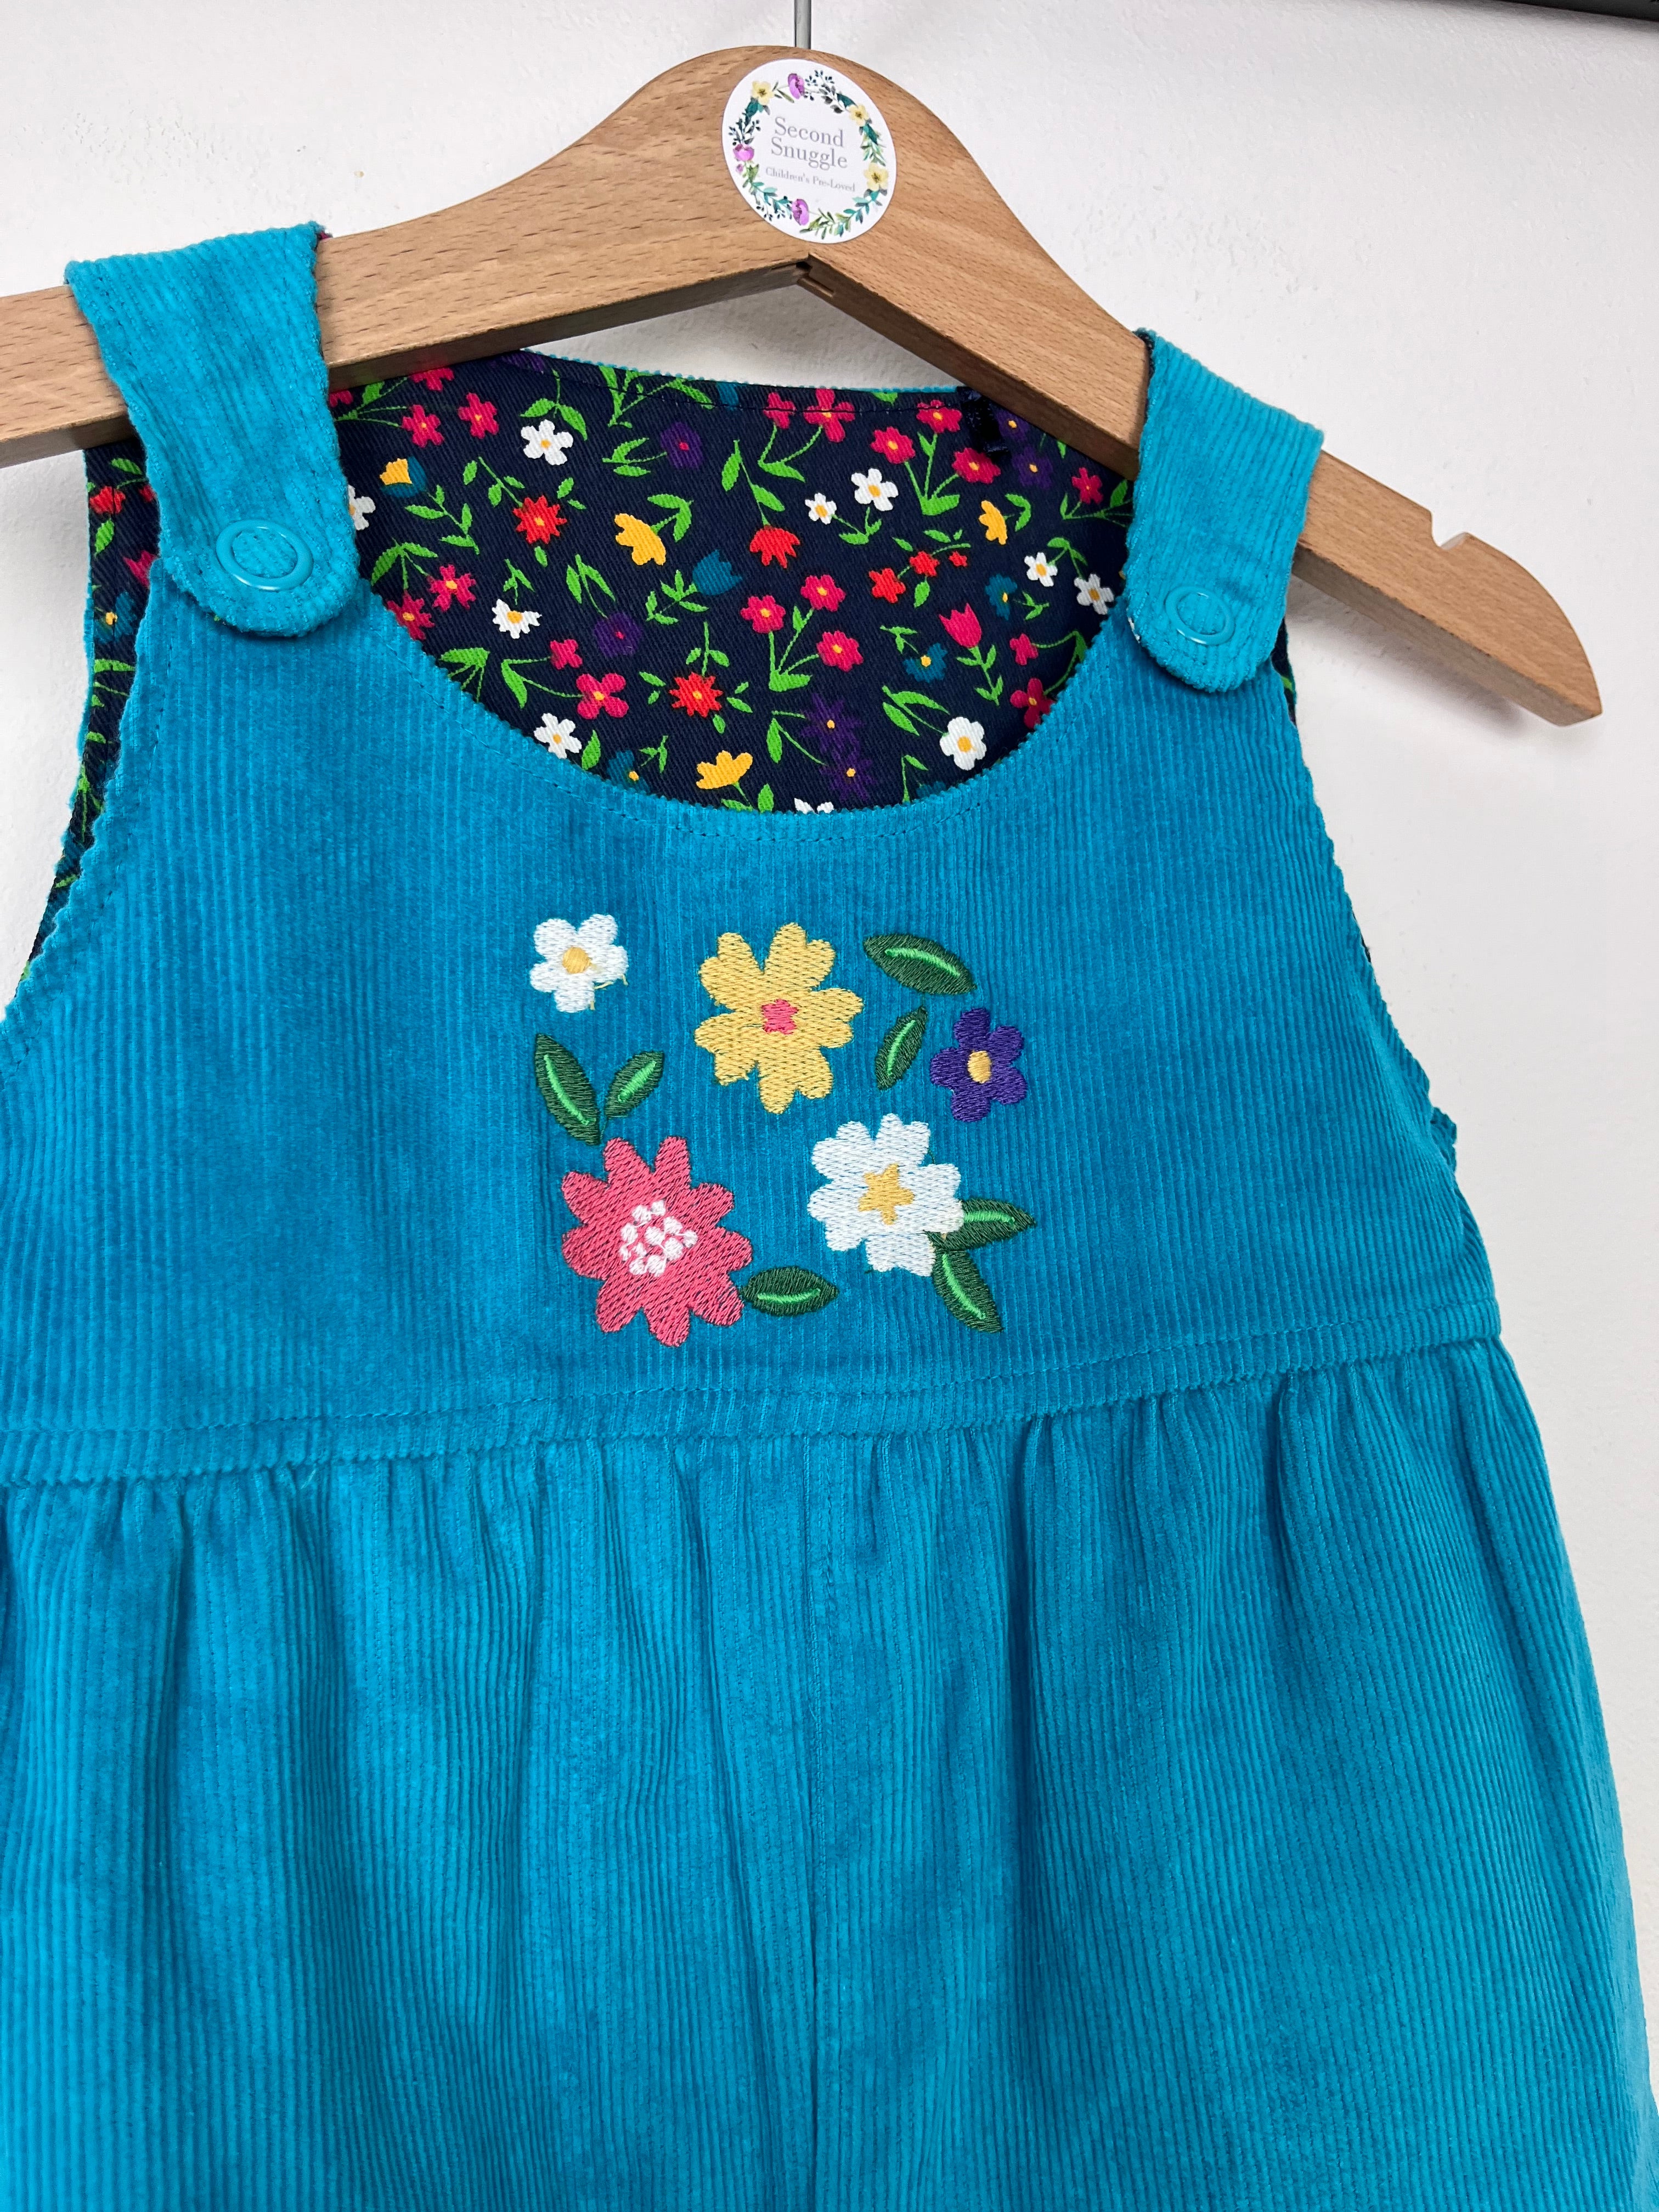 Frugi Reversible Floral/ Blue Dungarees 3-4 Years-Dungarees-Second Snuggle Preloved